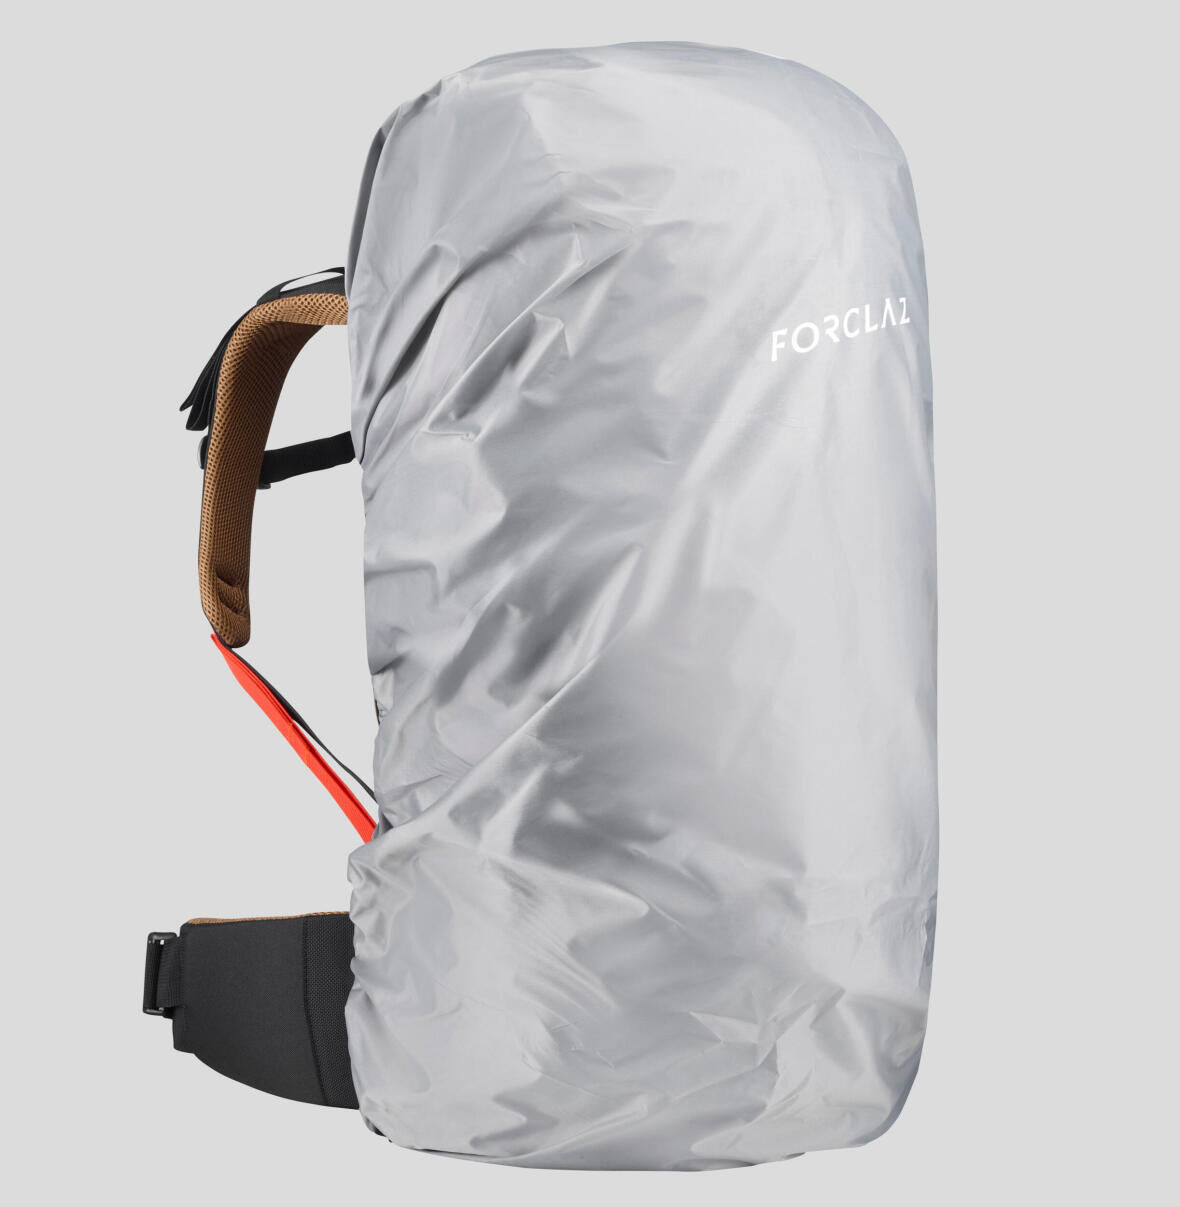 Some practical advice on using your MT100 trekking bag